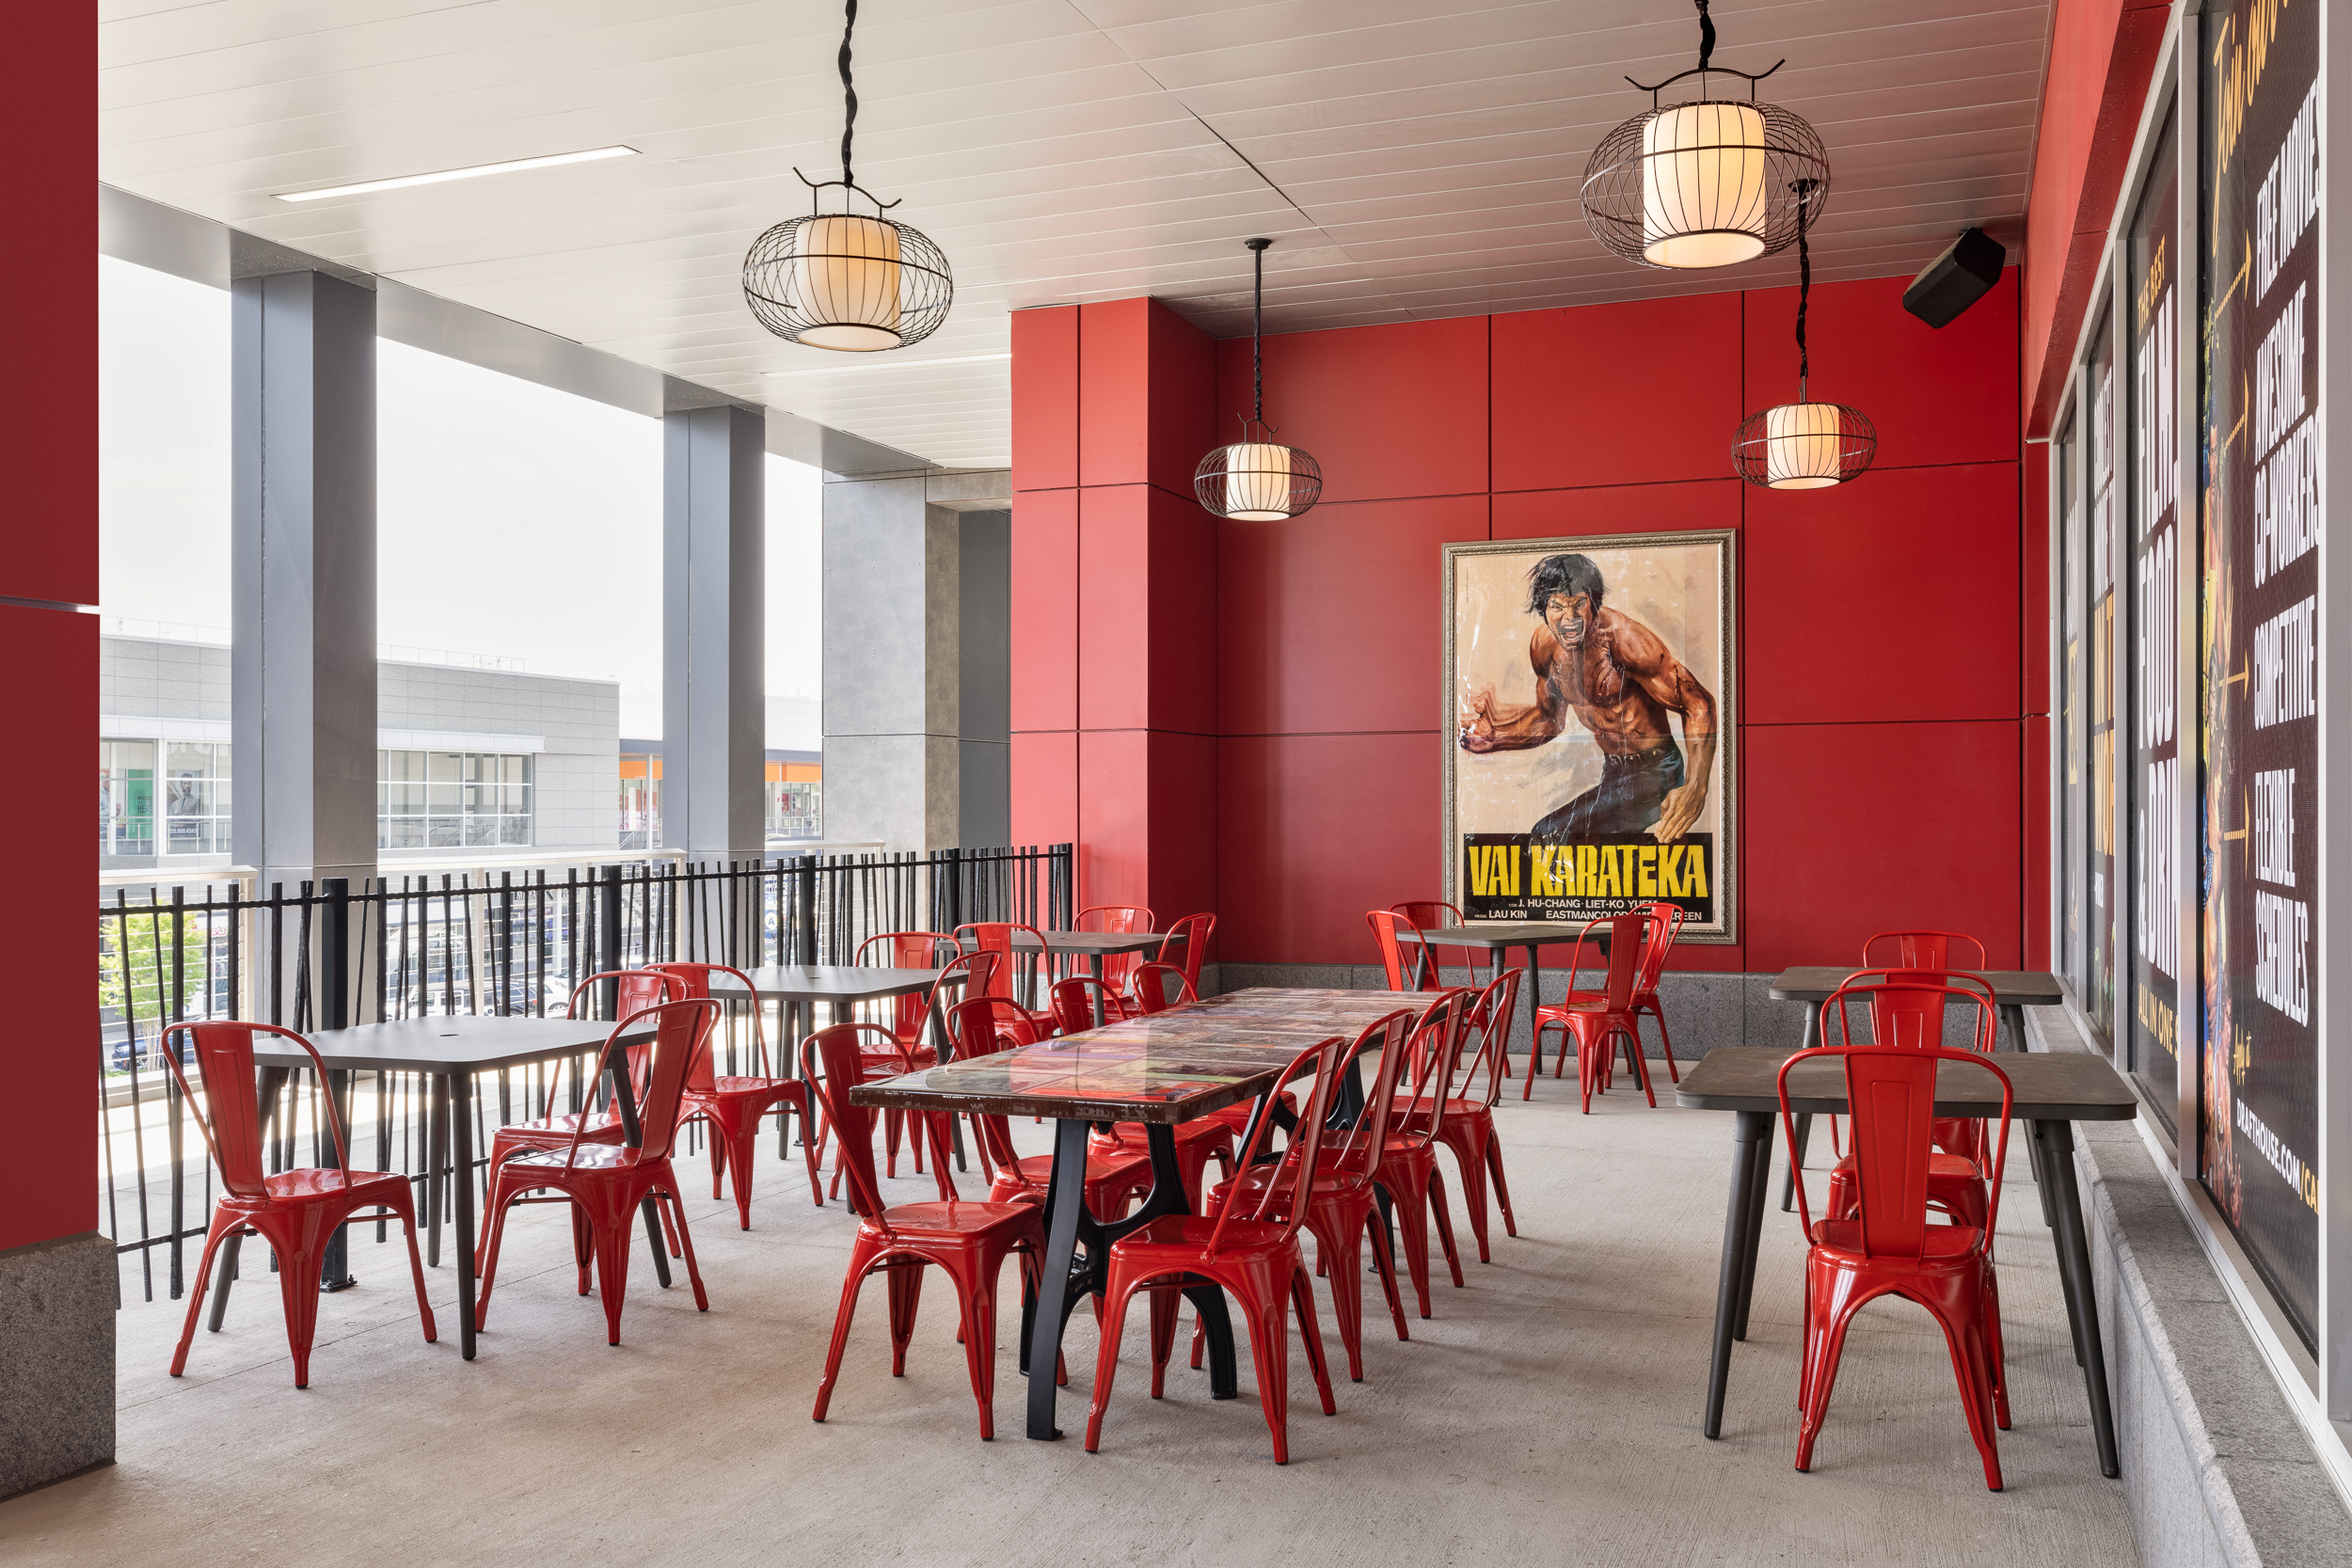 An outdoor patio with several tables with seating. On a red wall behind the tables is a framed movie poster for "Val Karateka"